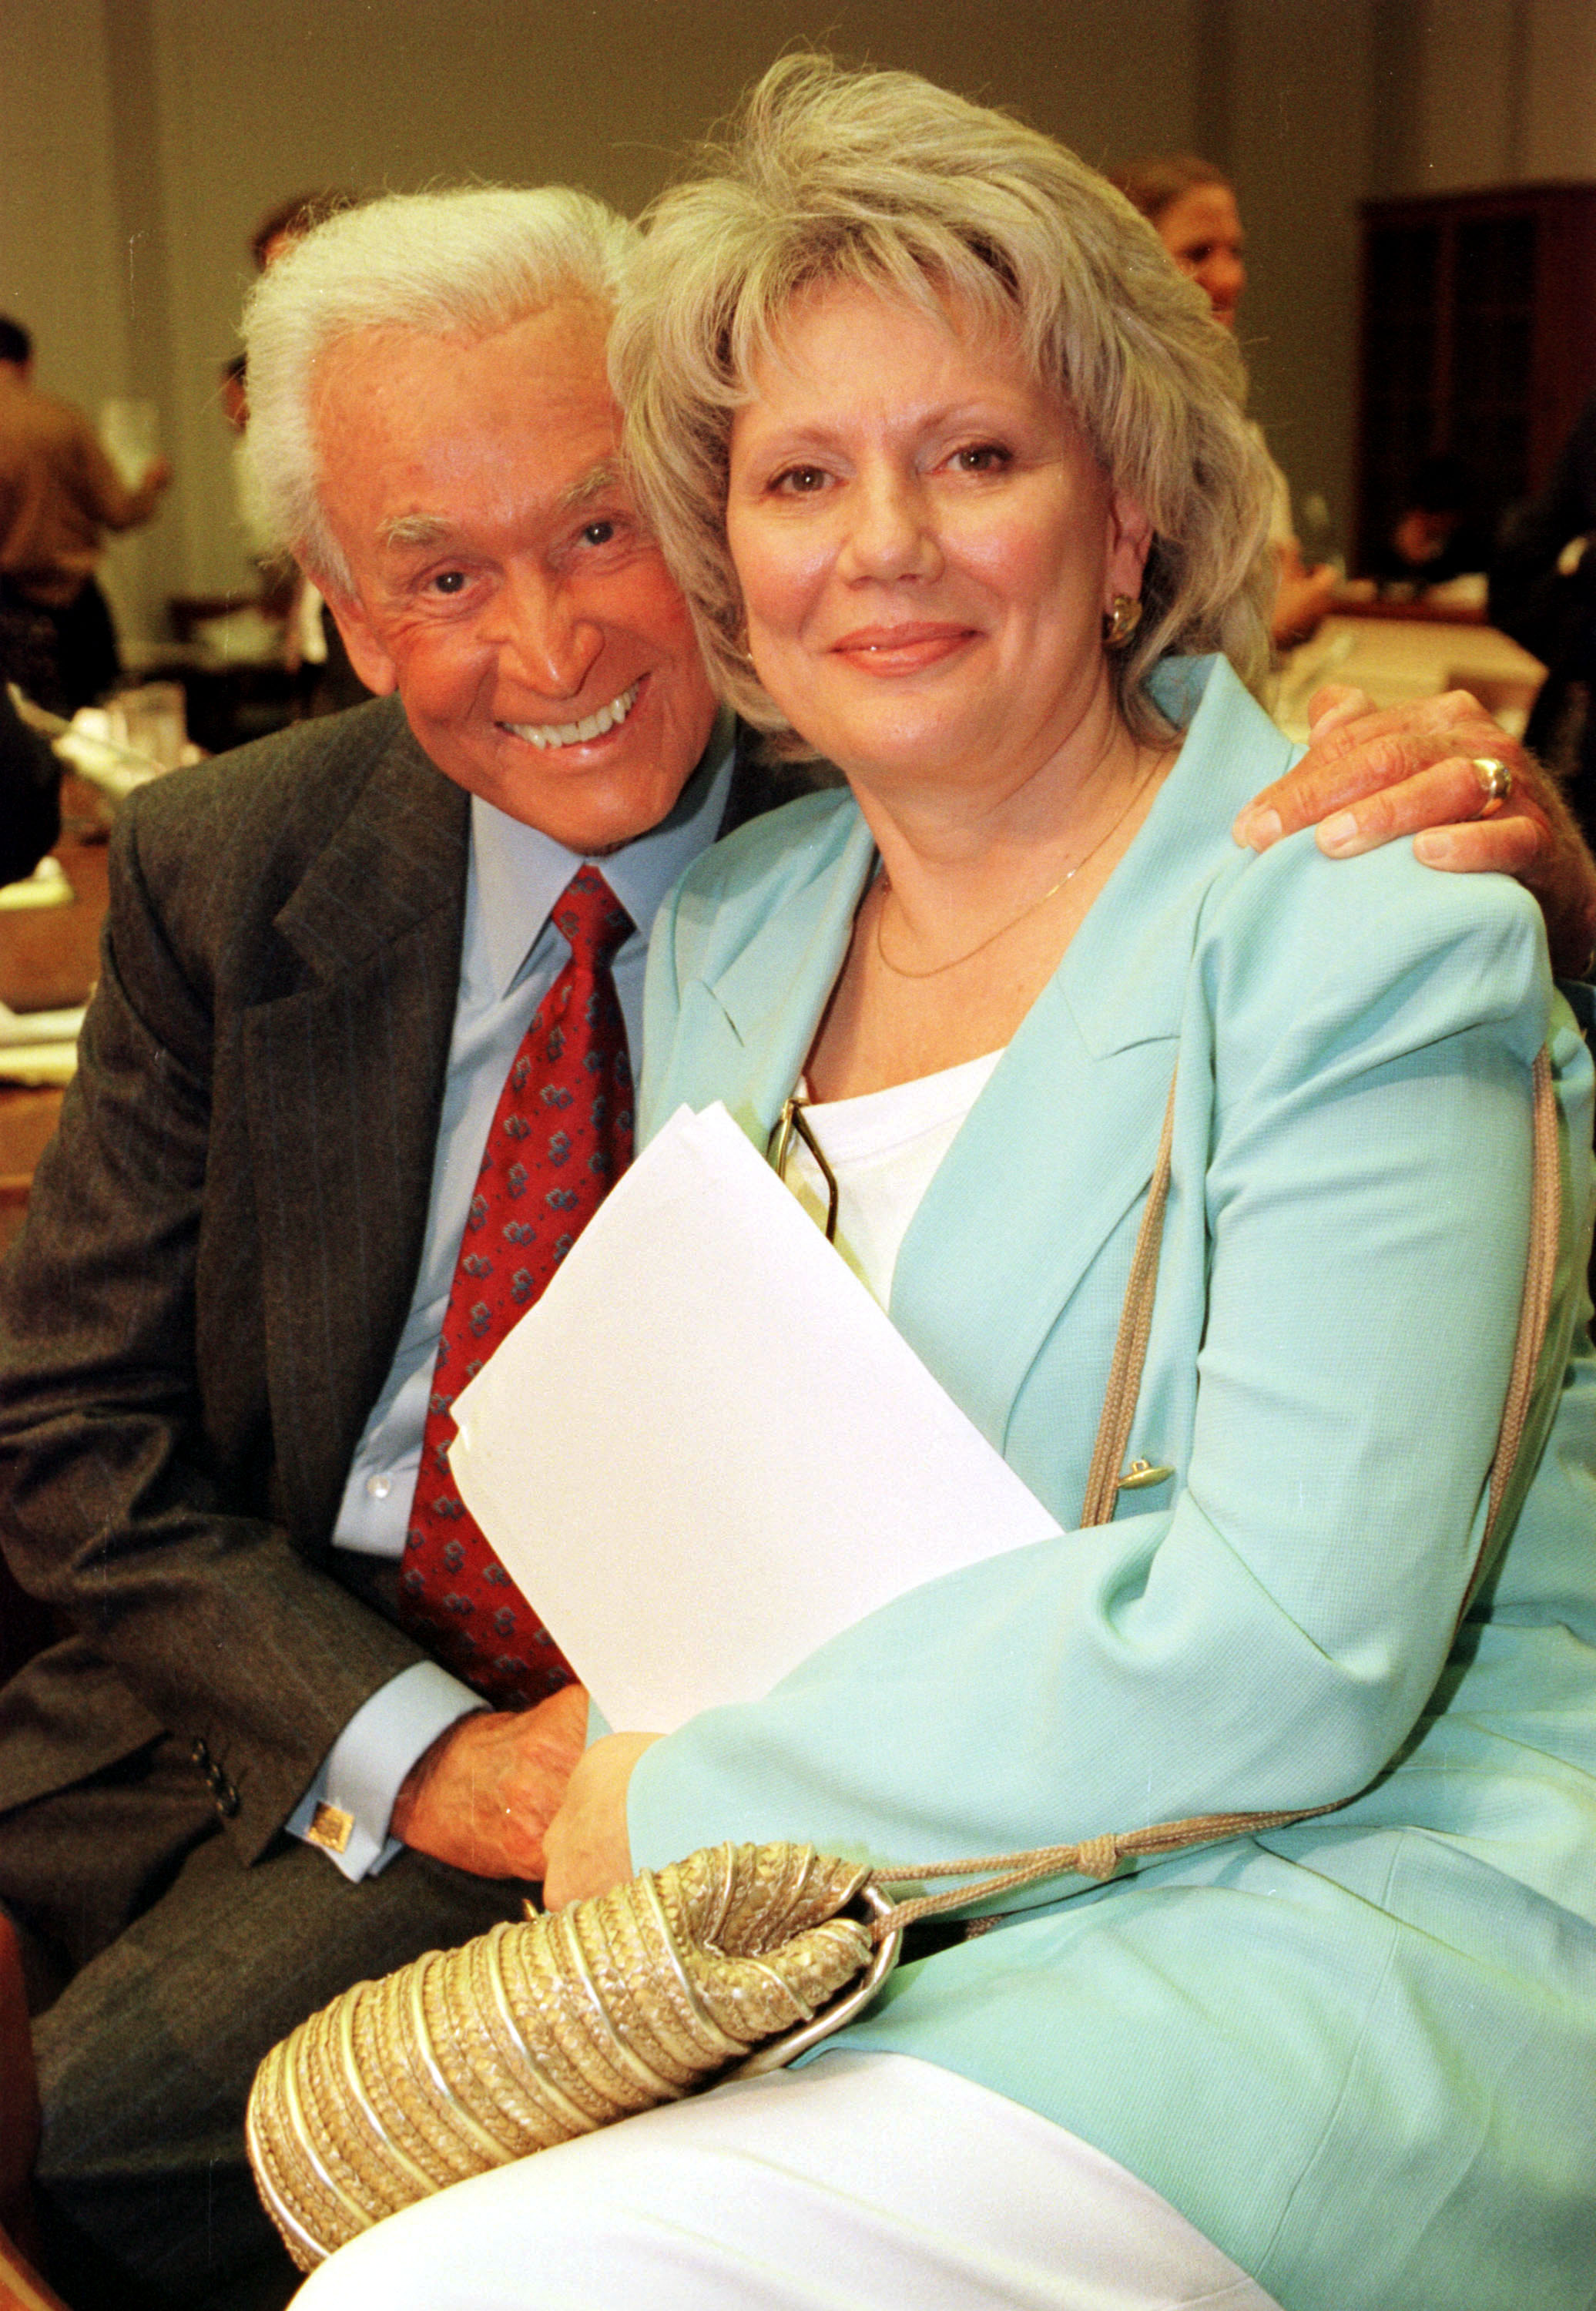 Bob Barker and Nancy Burnet posing for a picture after attending a hearing on the "Captive Elephant Accident Prevention Act of 1999" in Washington, 2000 | Source: Getty Images